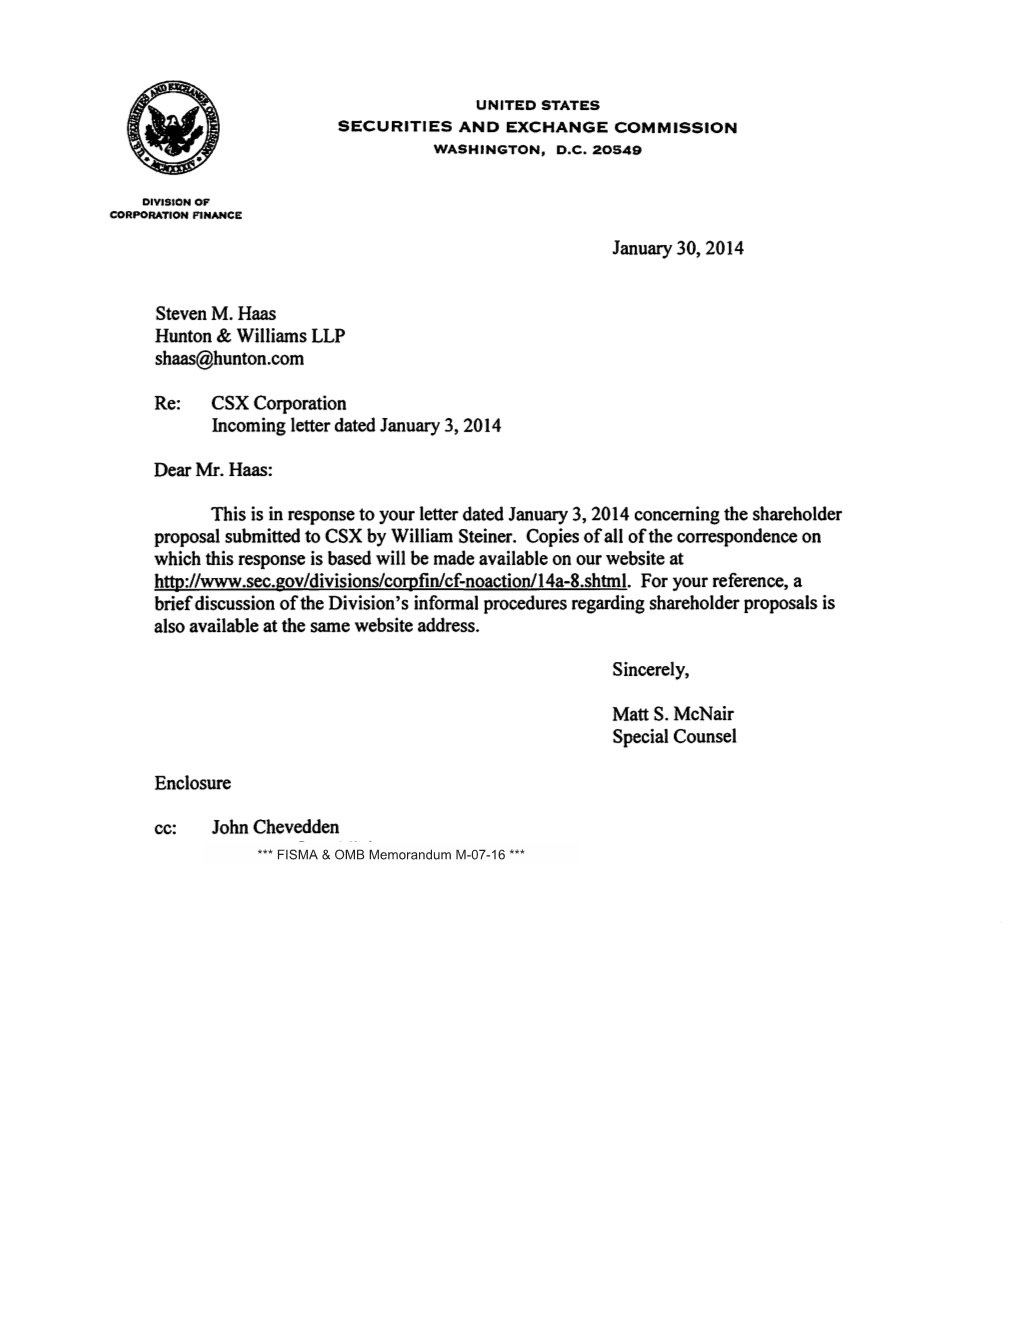 CSX Corporation Incoming Letter Dated January 3, 2014